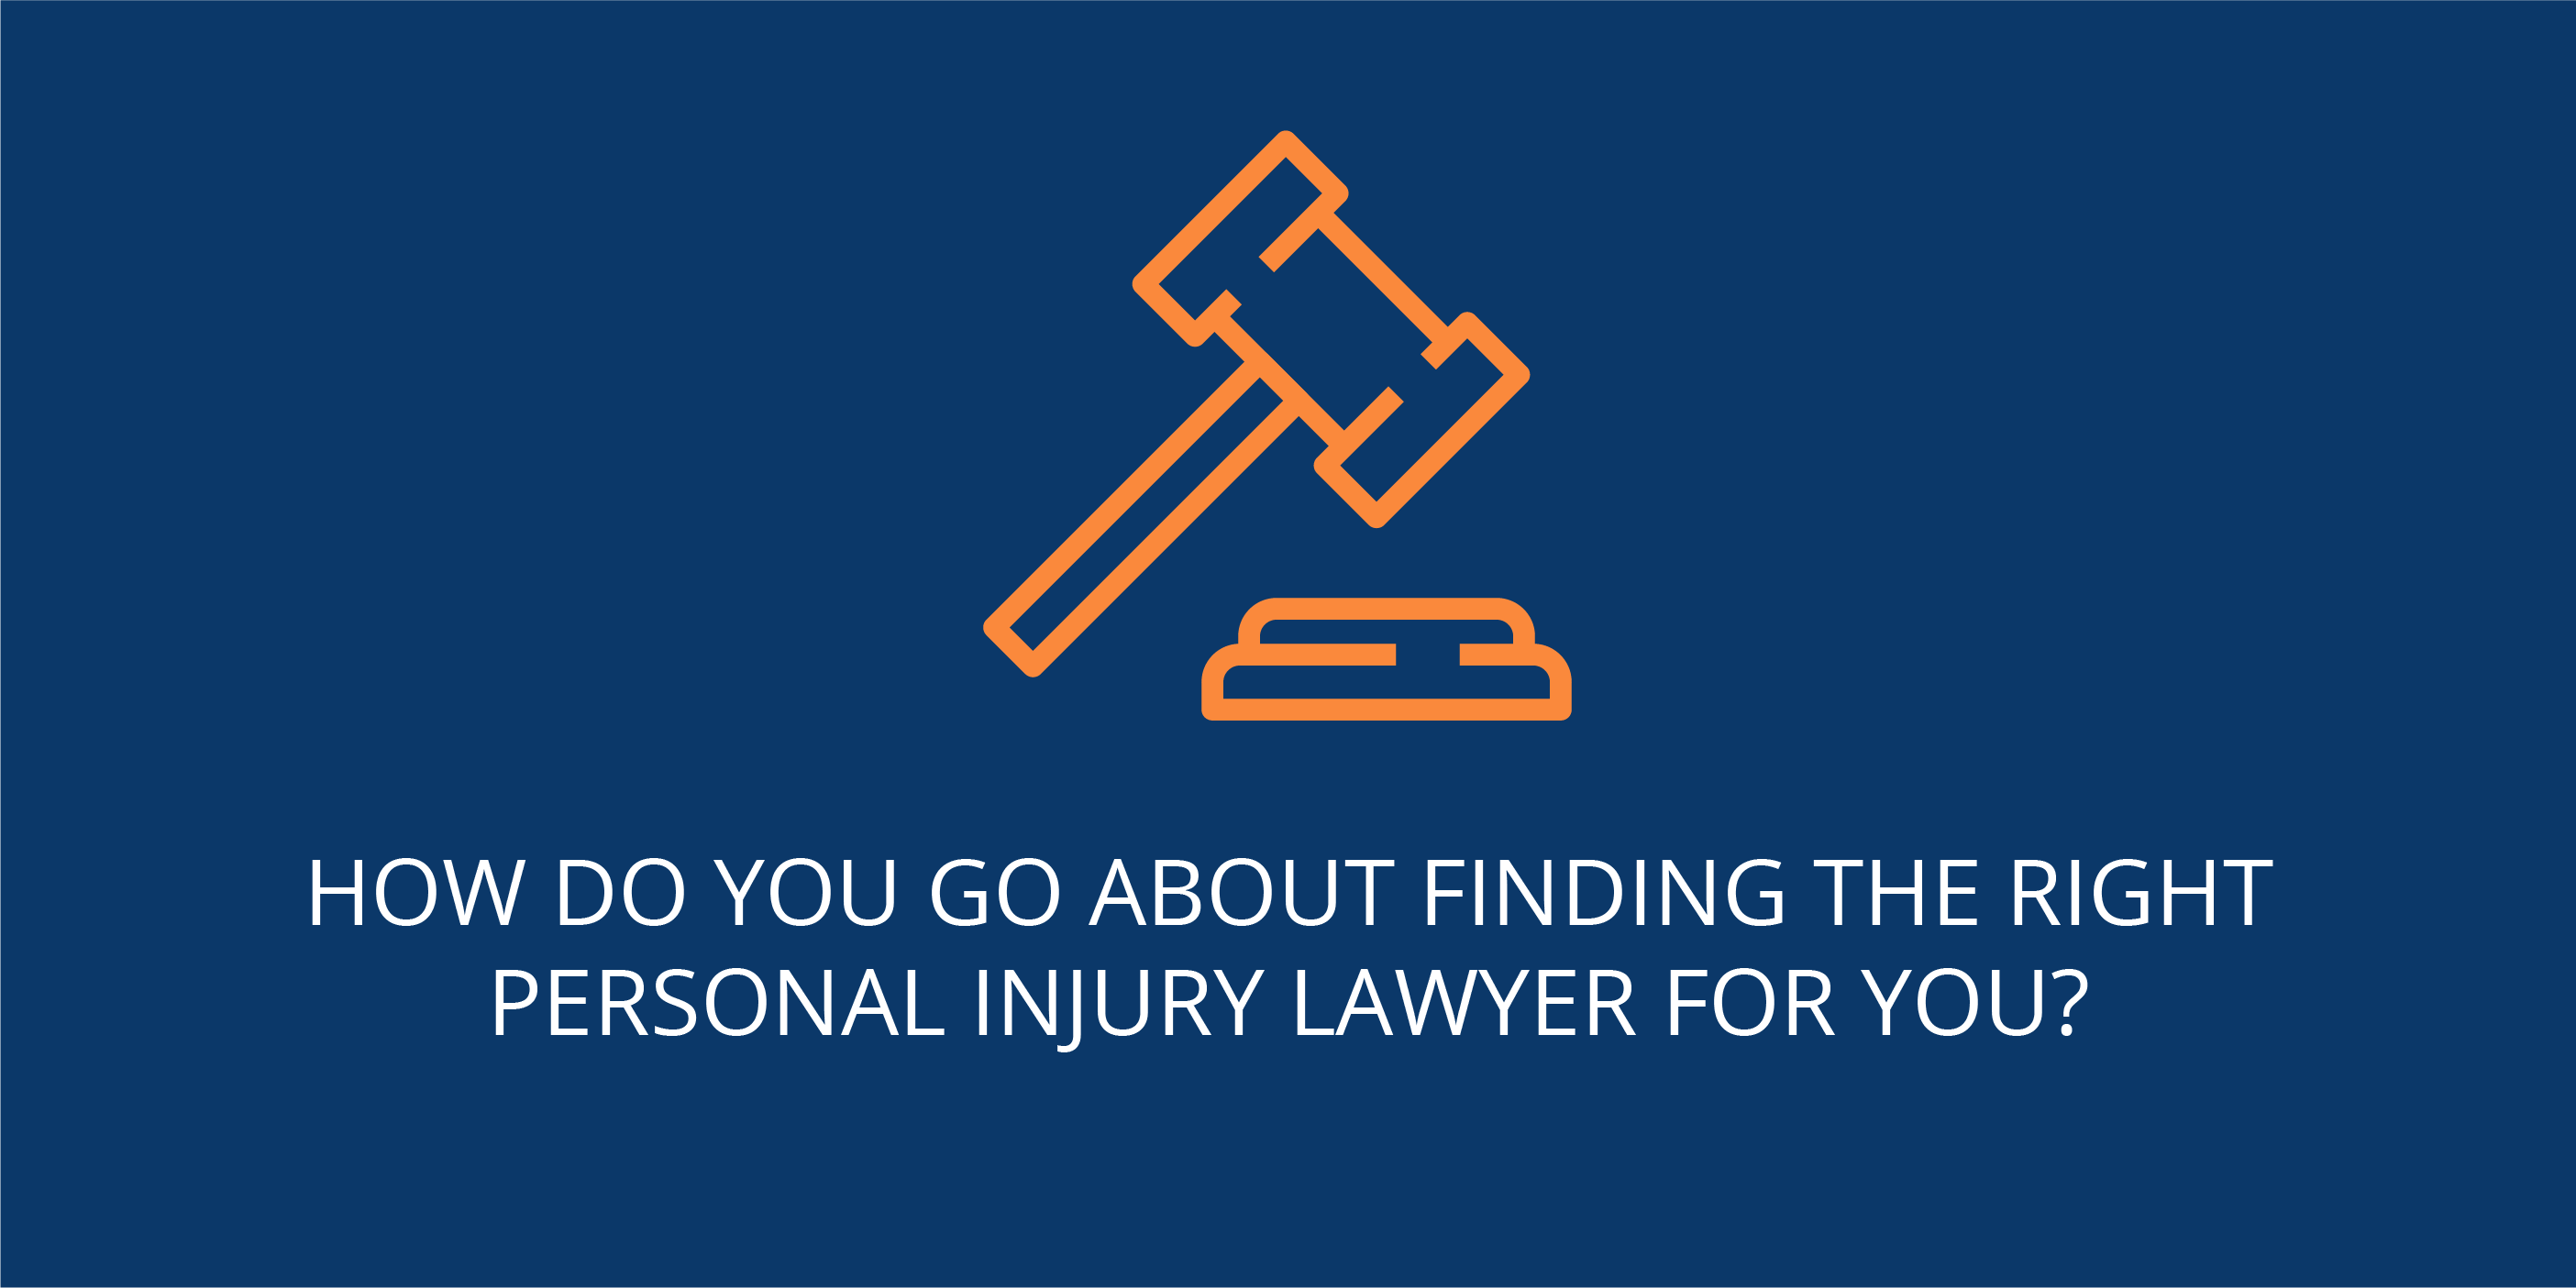 How do you go about finding the right personal injury lawyer for you?